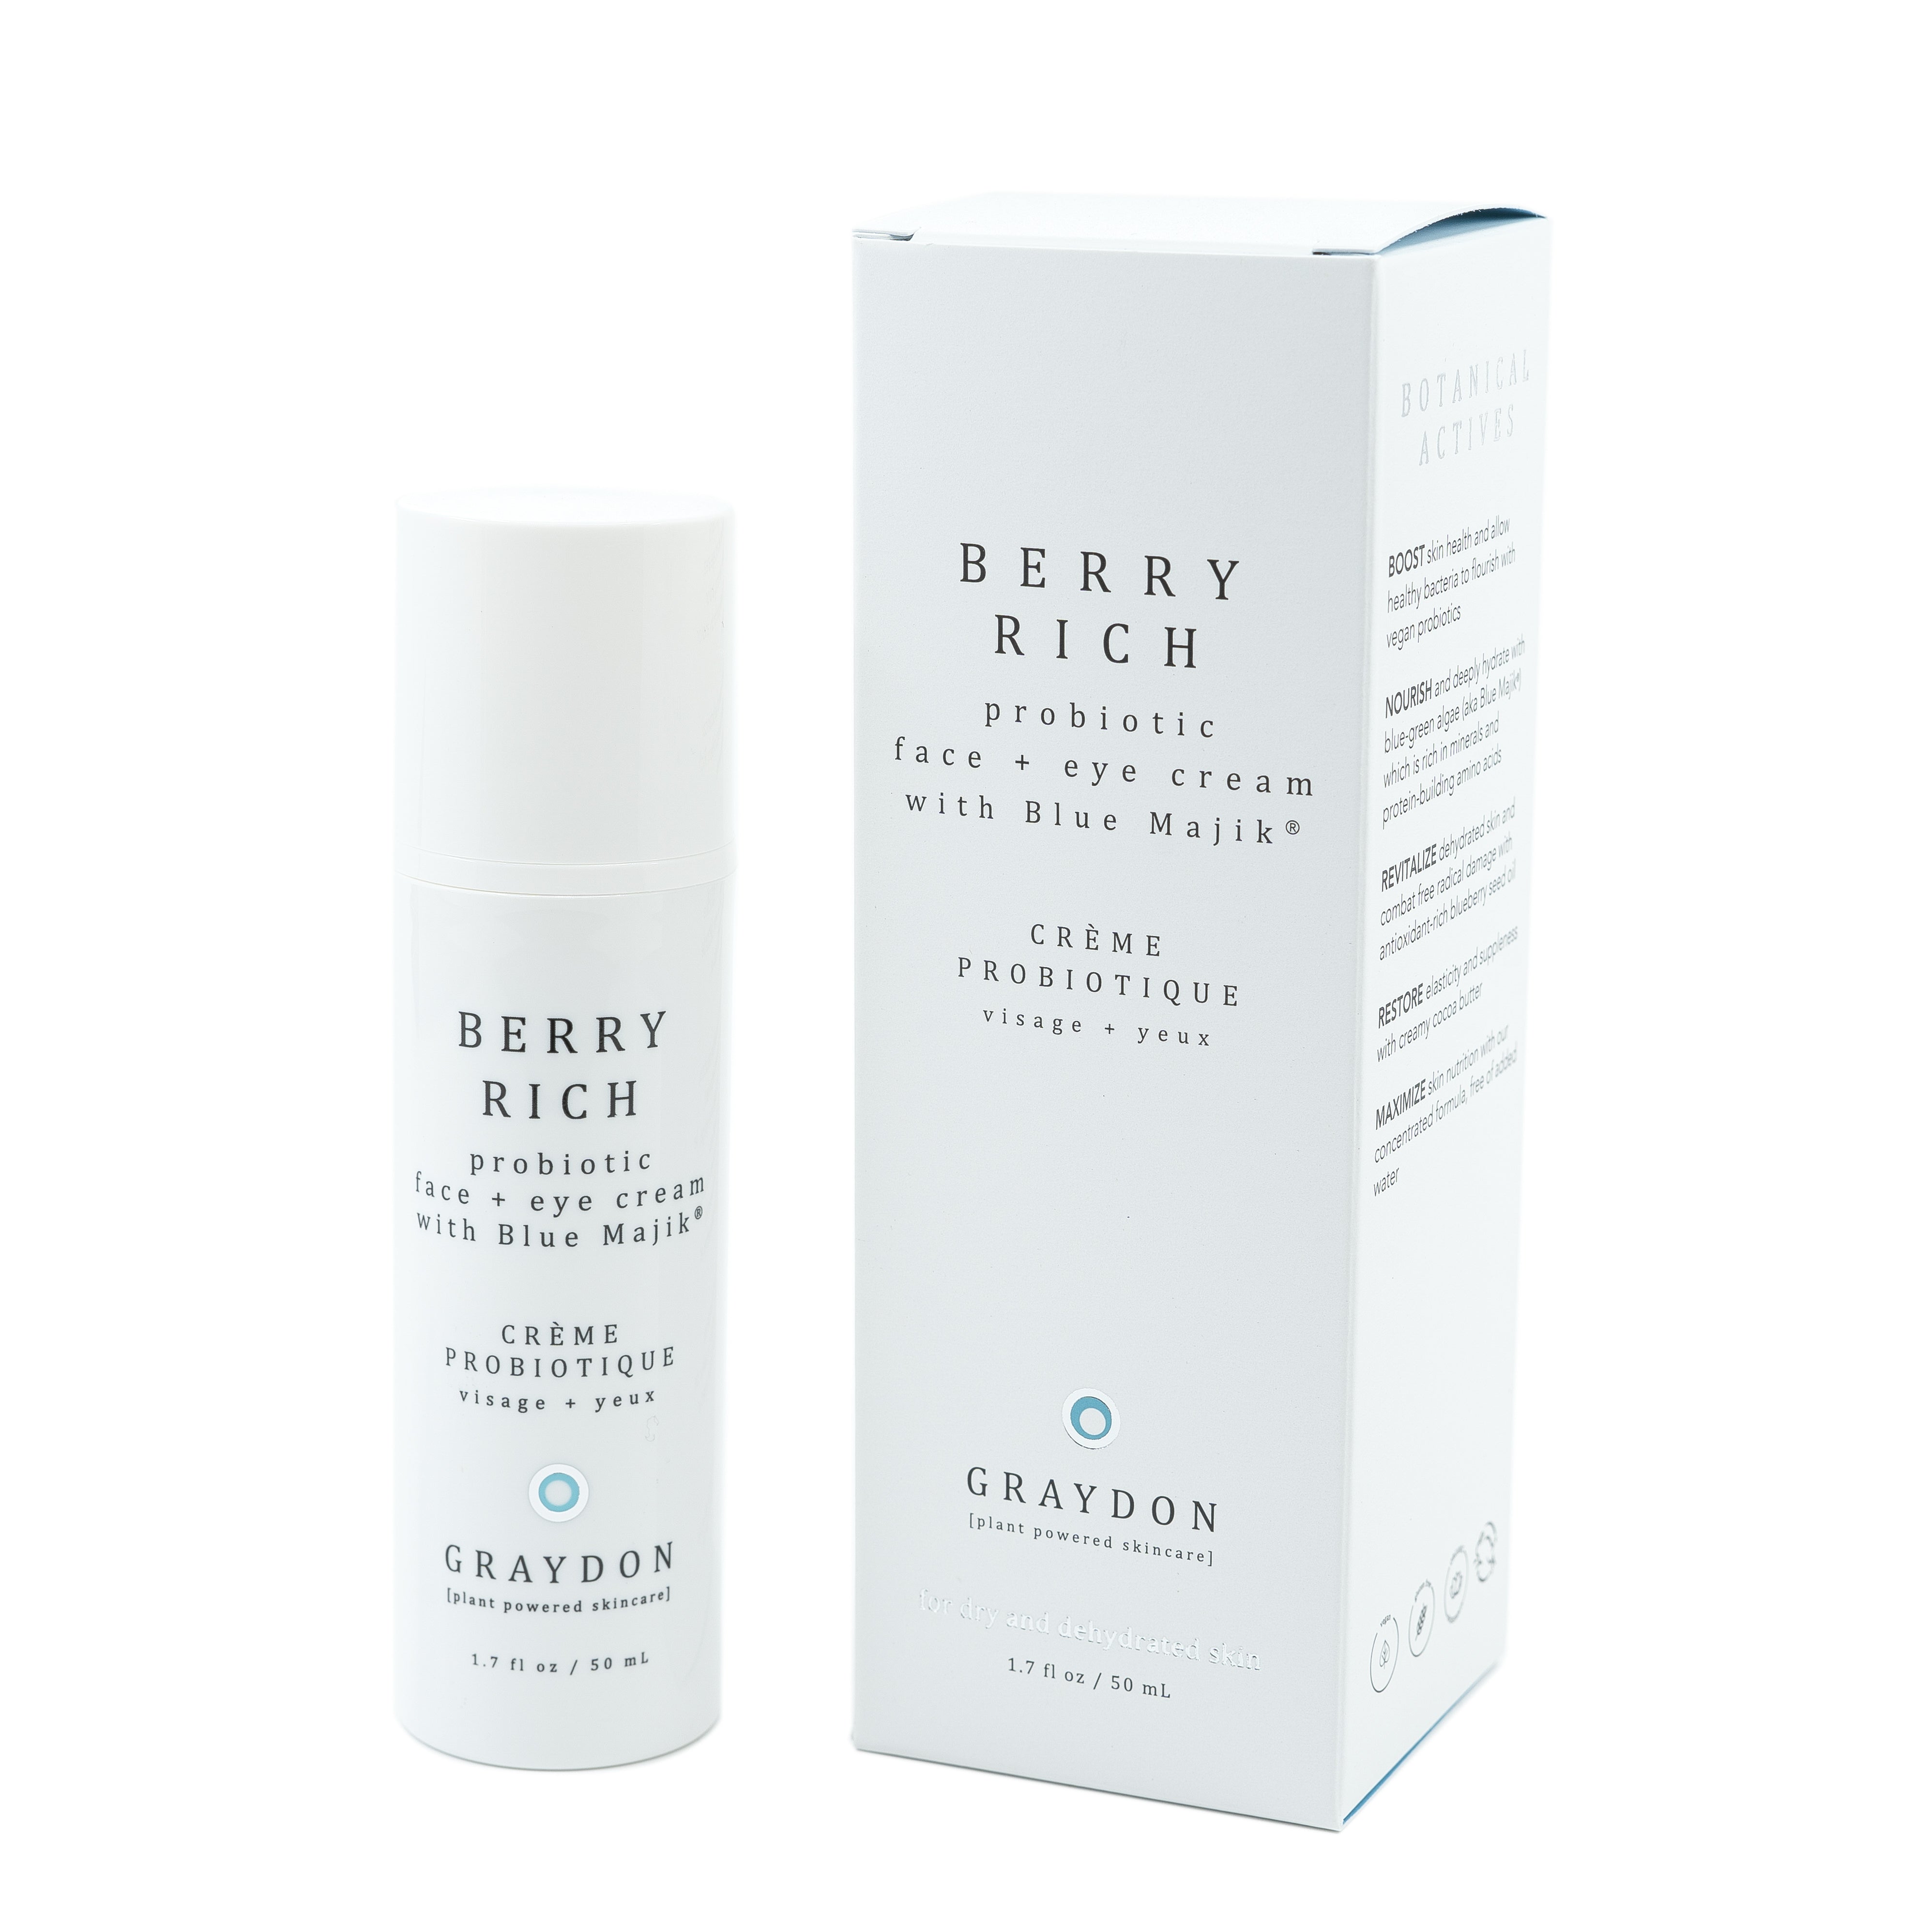 Berry Rich Probiotic Face + Eye Cream with Blue Majik